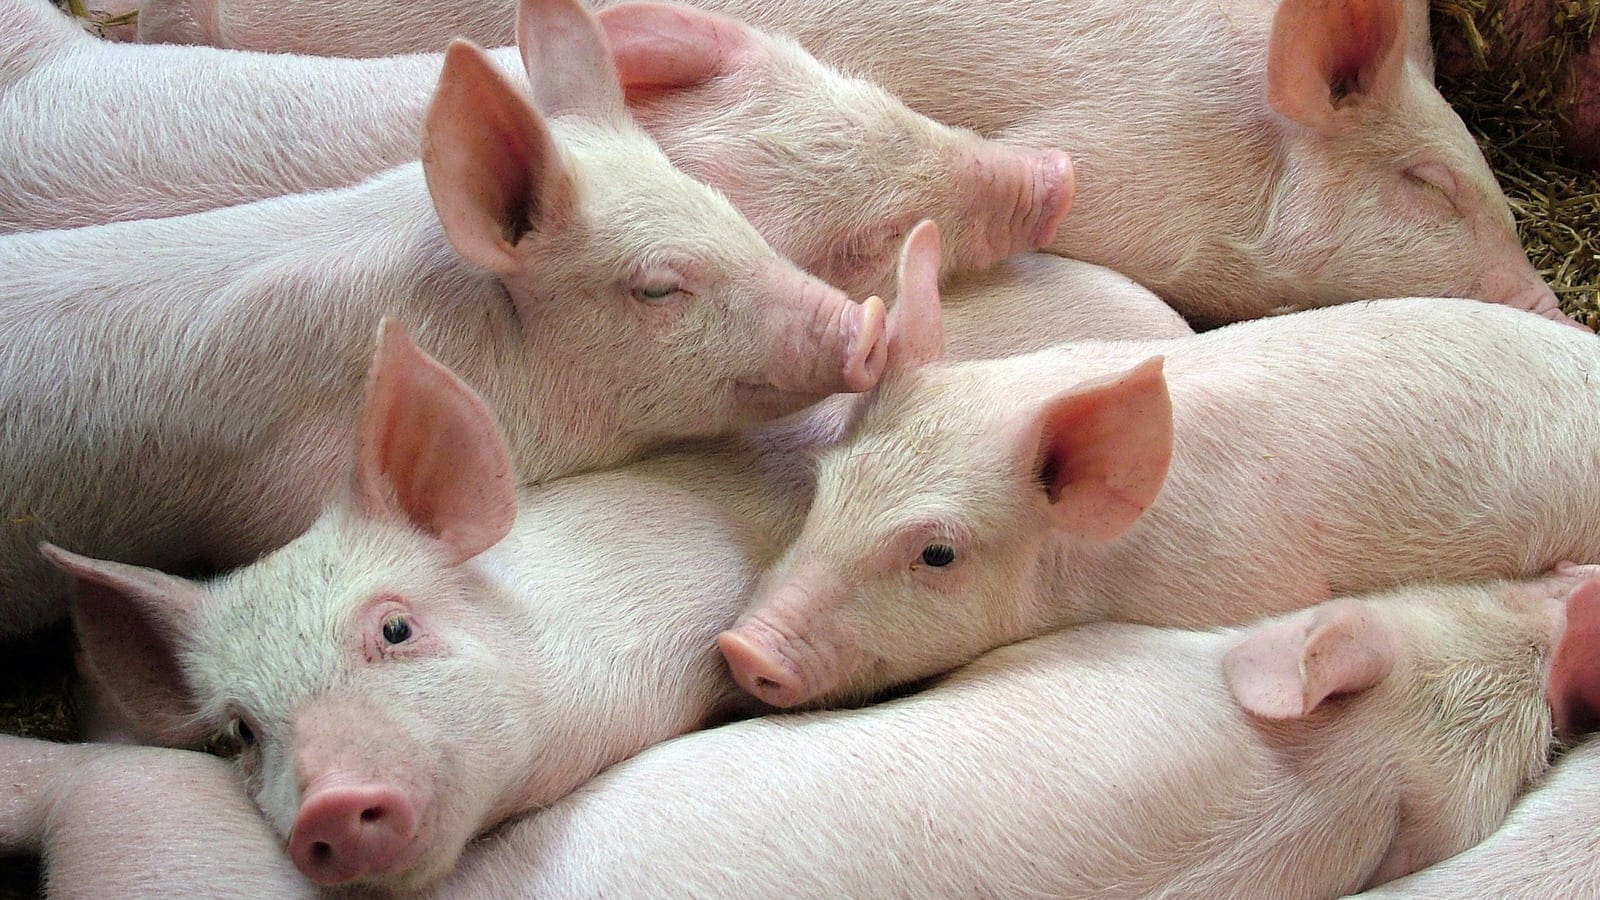 US Food and Drugs Administration approves first genome-altered animal for human consumption